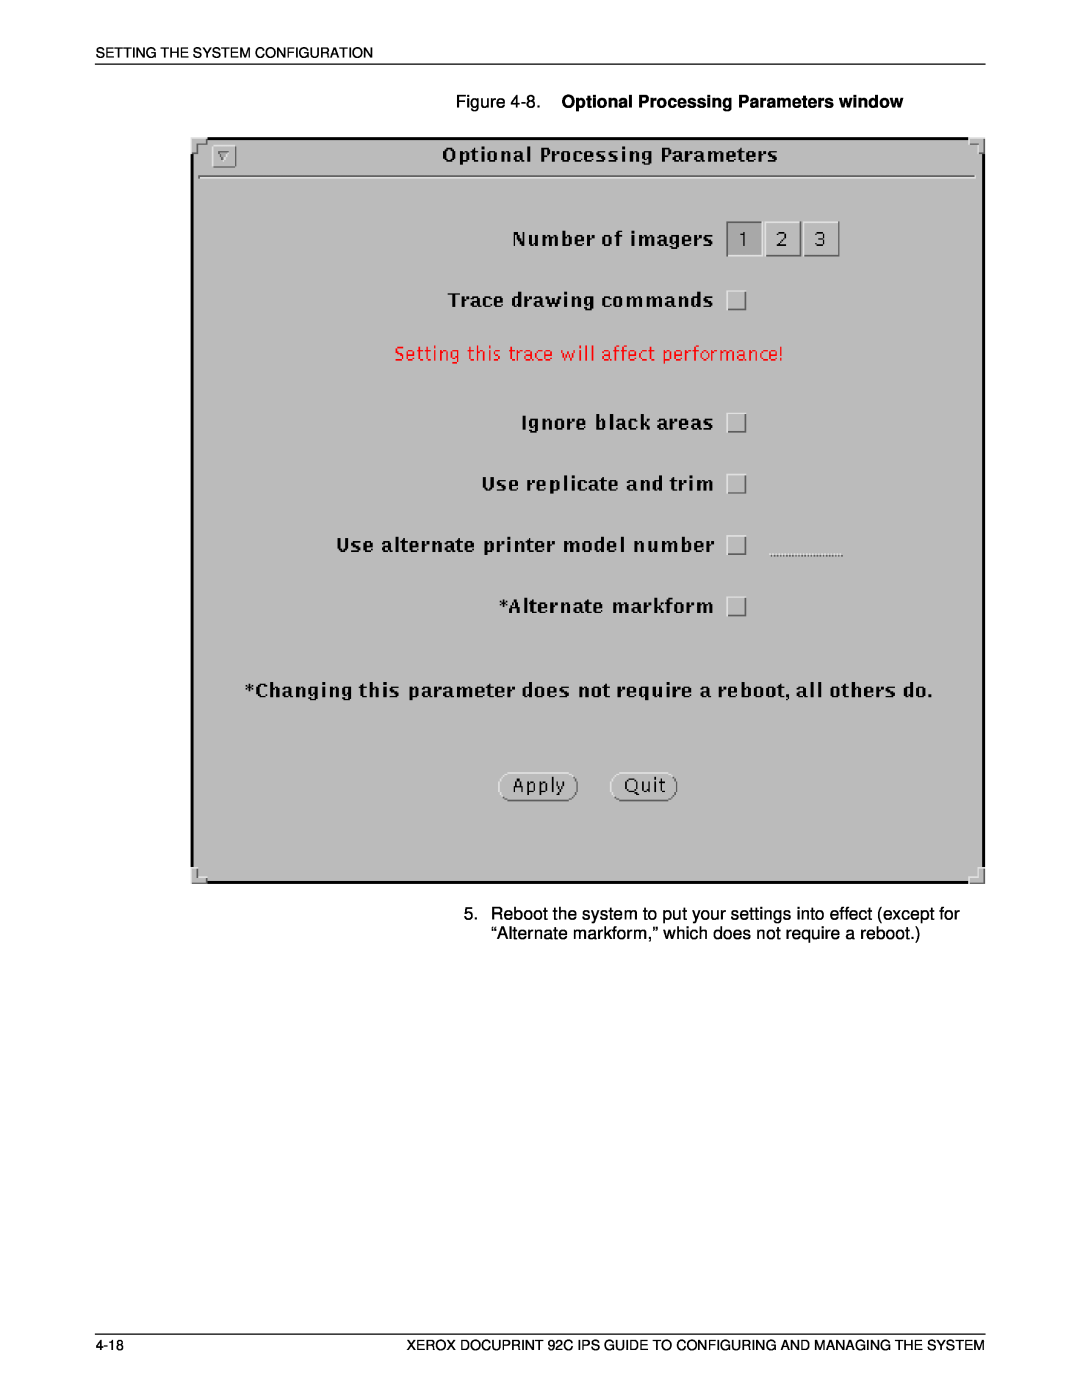 Xerox 92C IPS manual 8. Optional Processing Parameters window, Setting The System Configuration, 4-18 